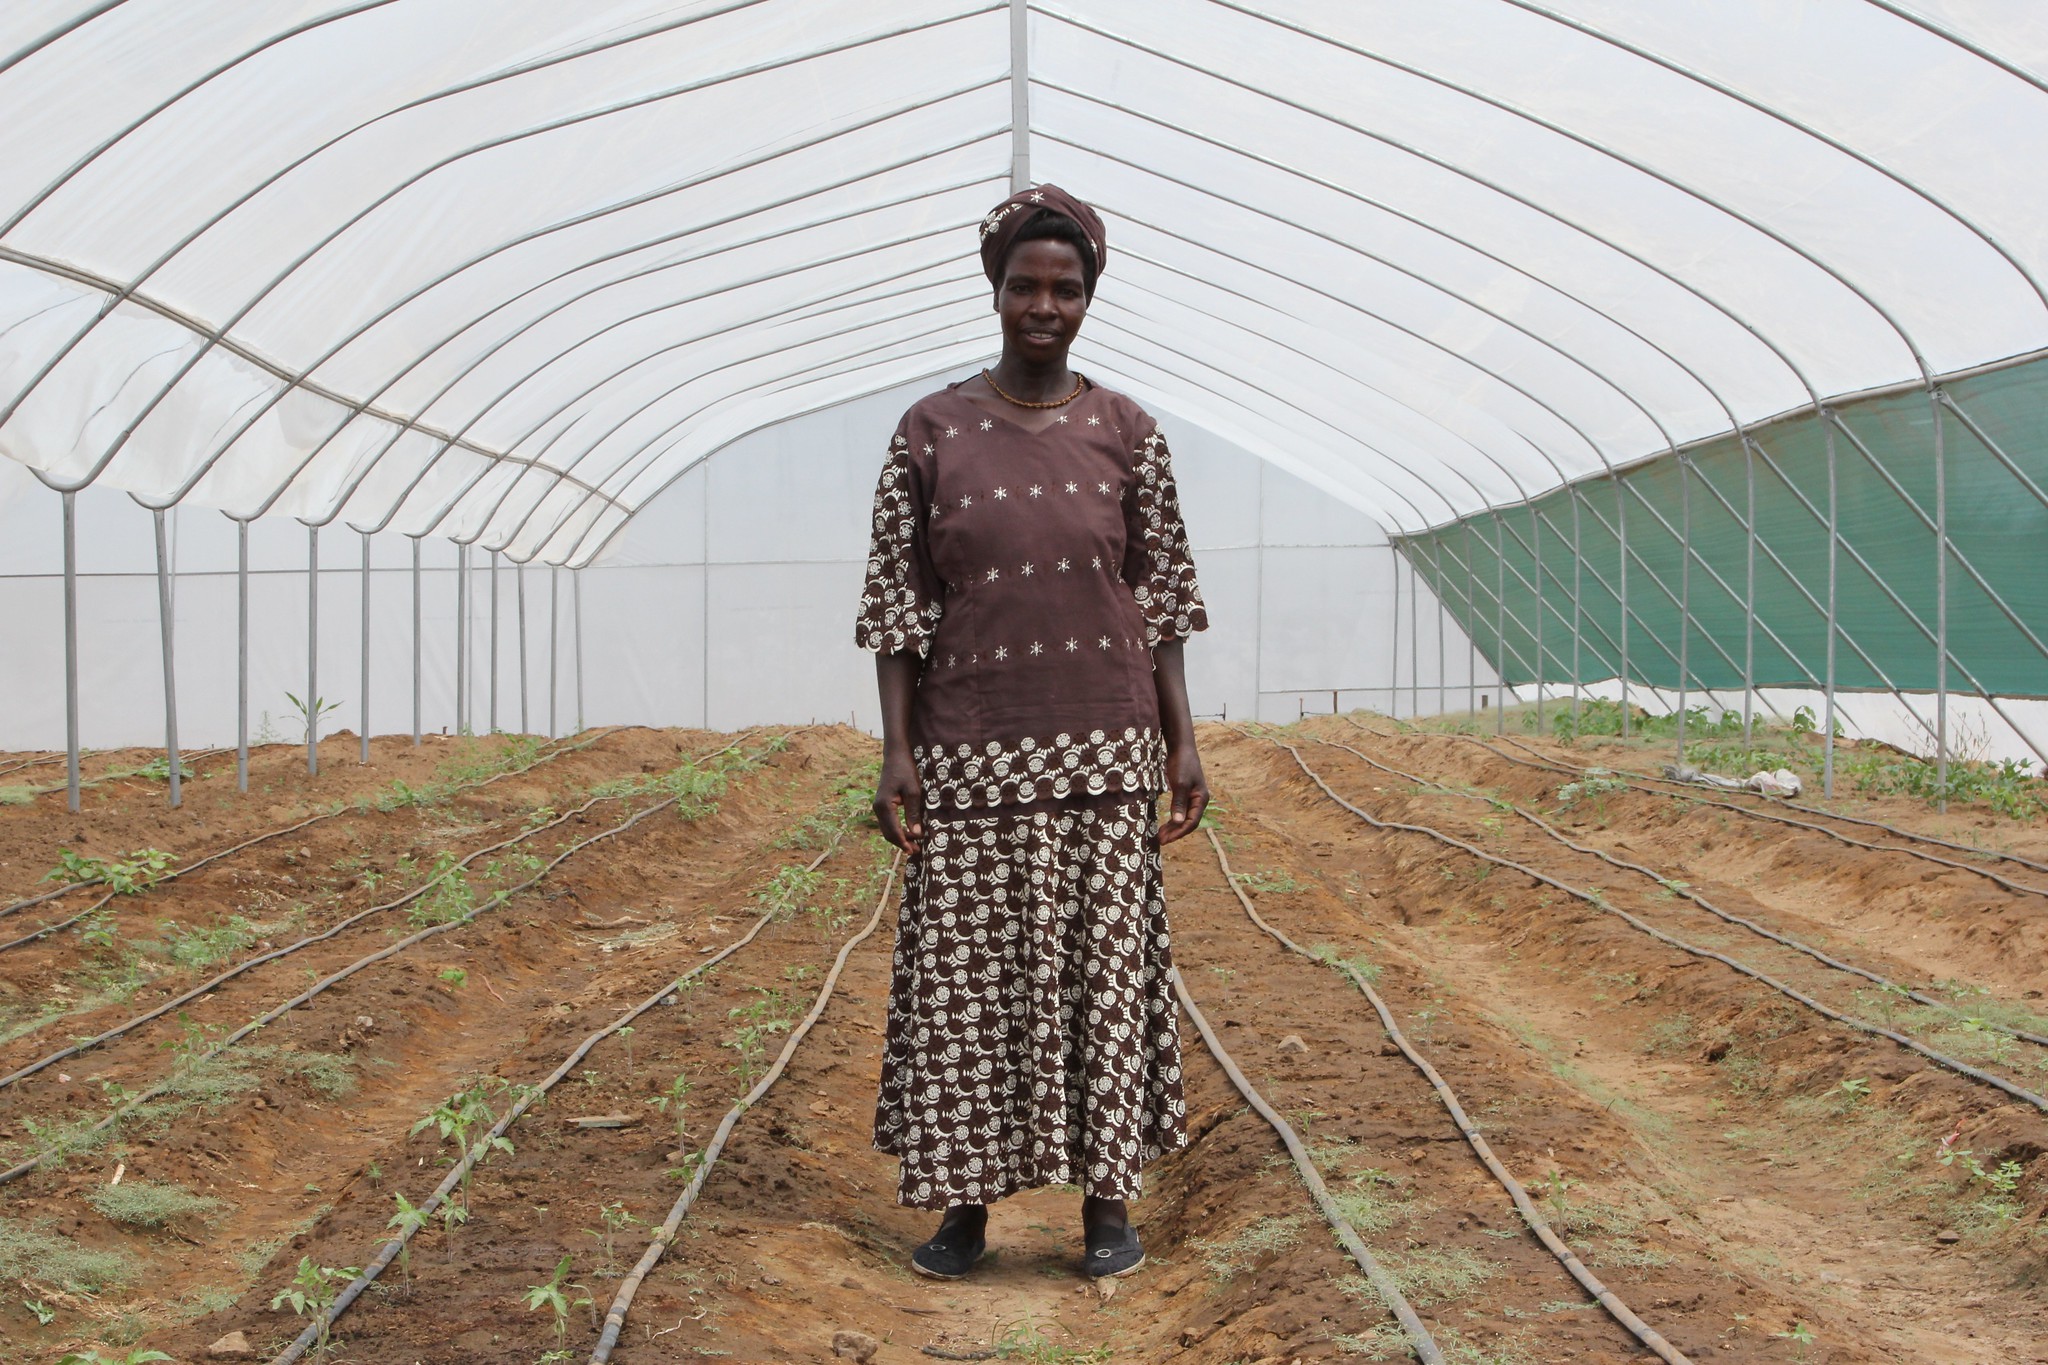 A striking image of a female farmer in an African agricultural setting looking straight at the camera